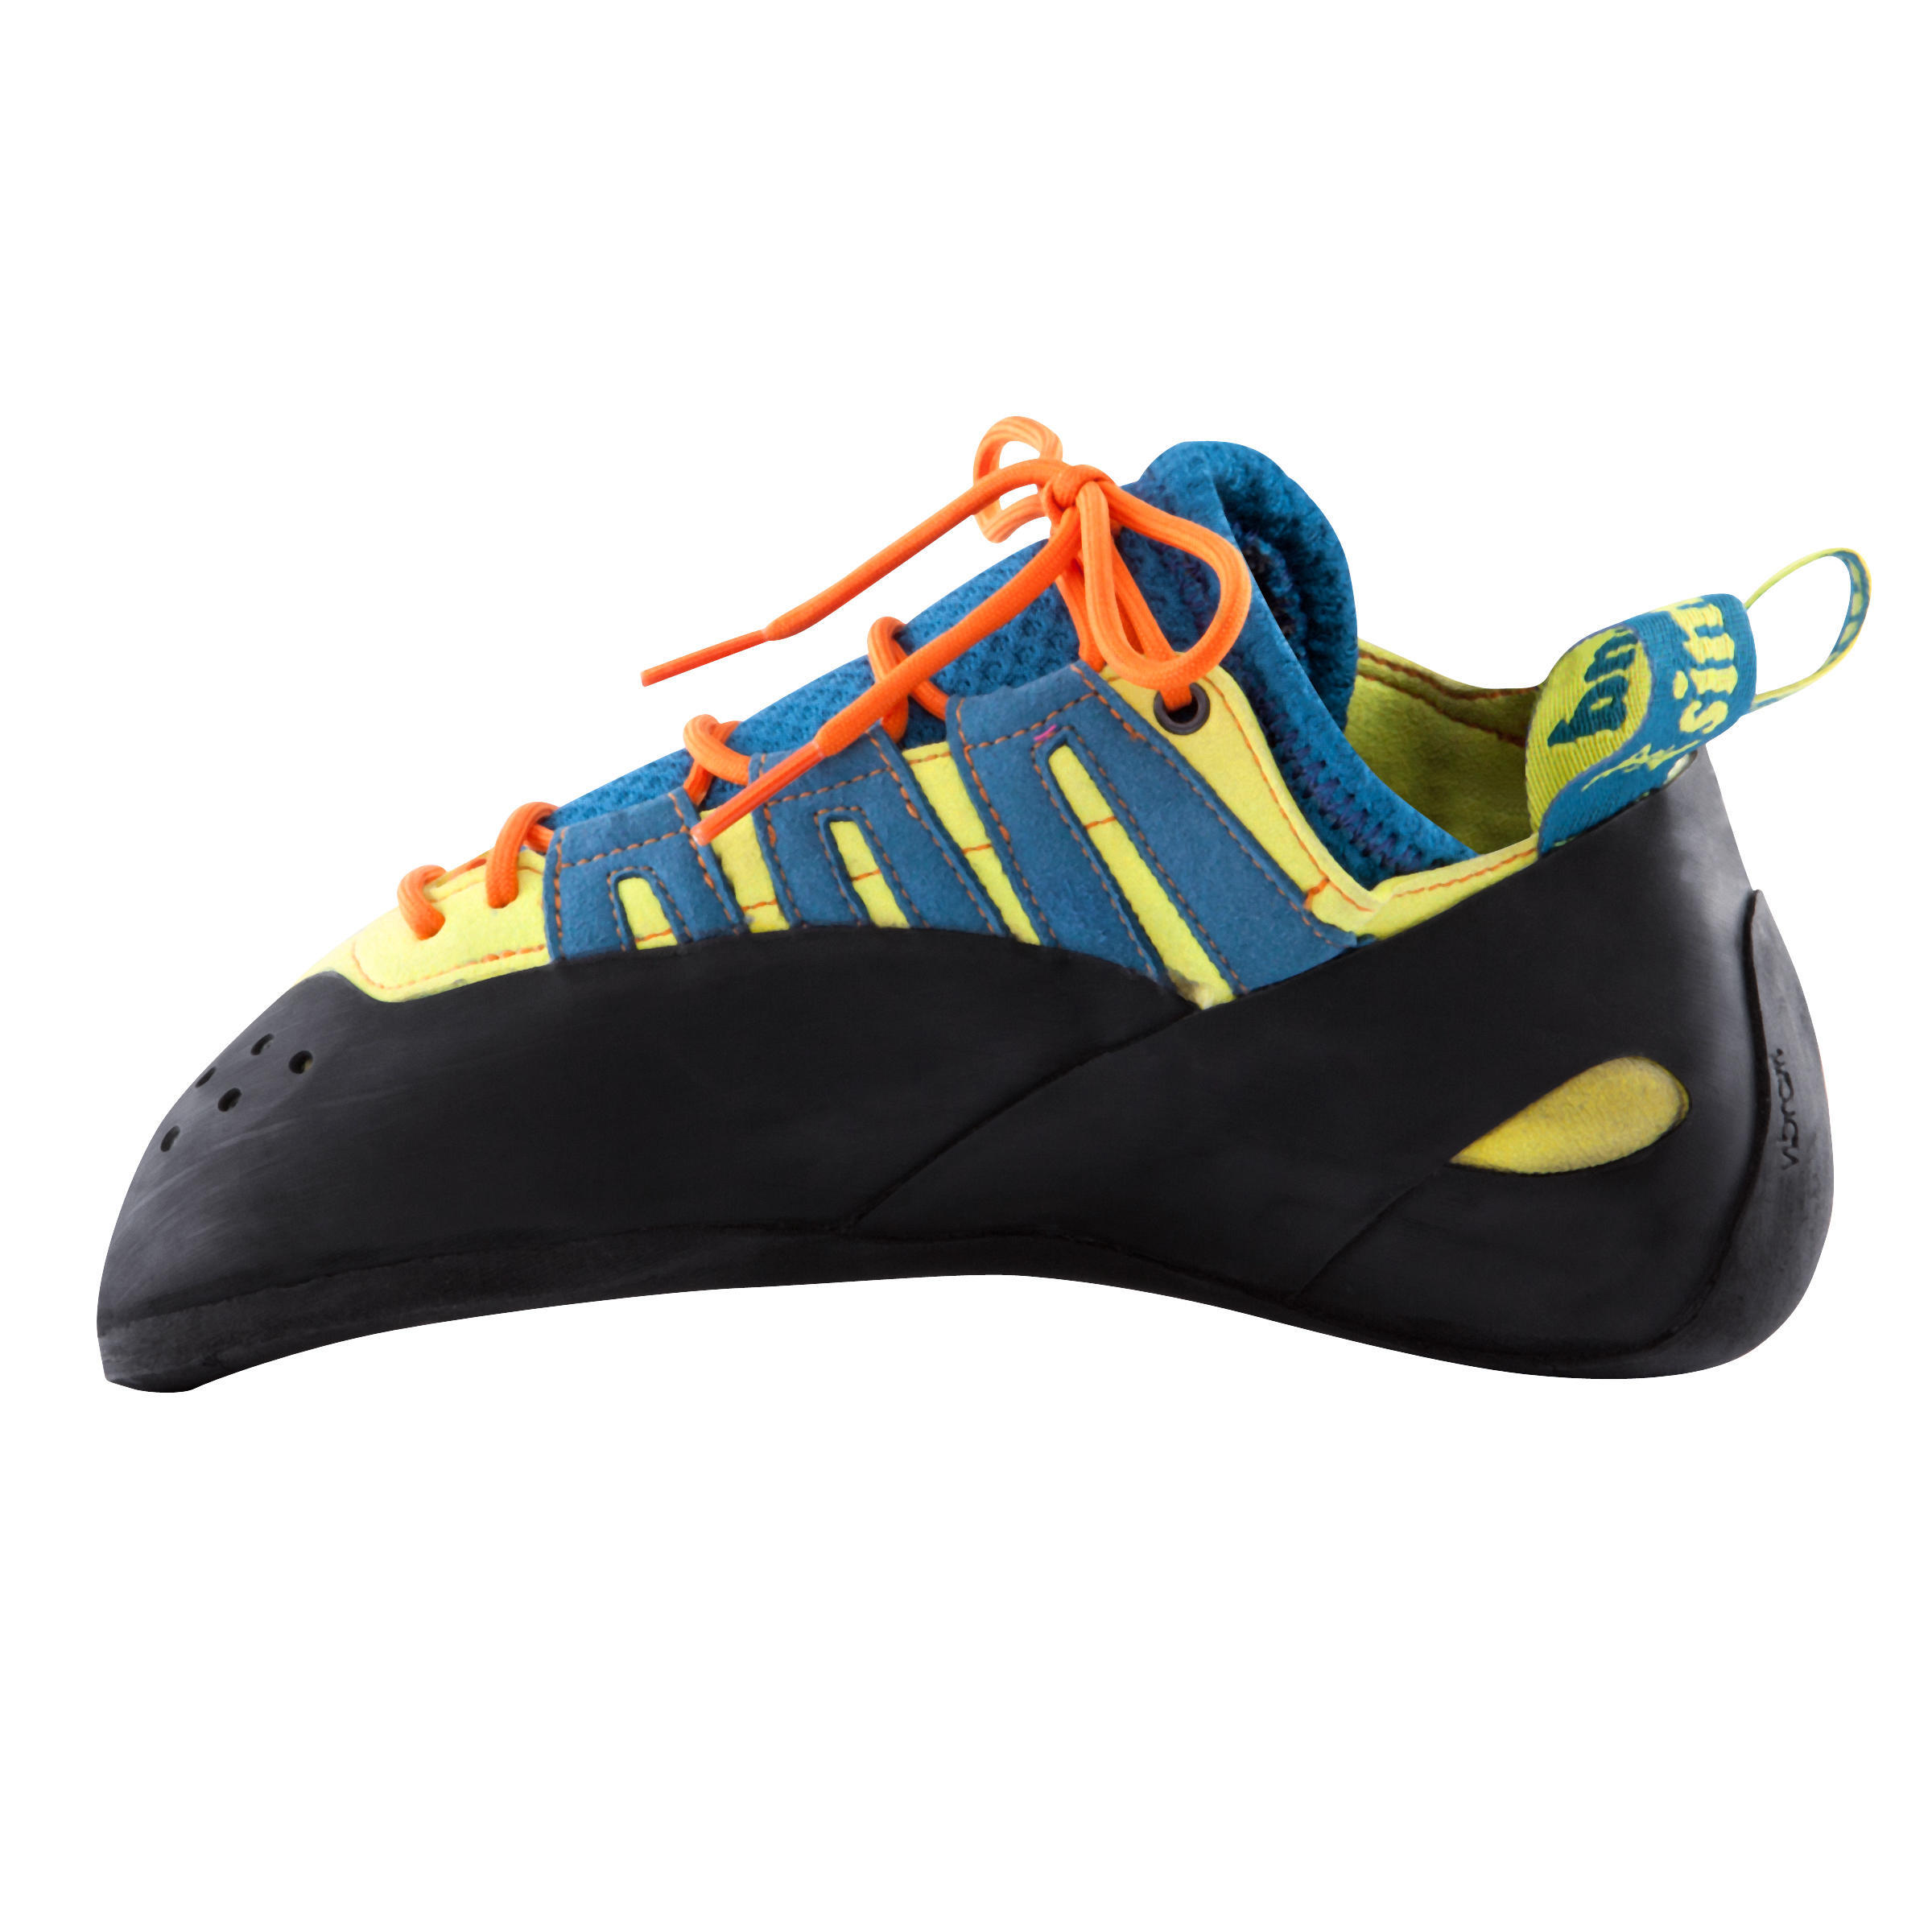 EDGE LACE-UP ADULT CLIMBING SHOES 3/14